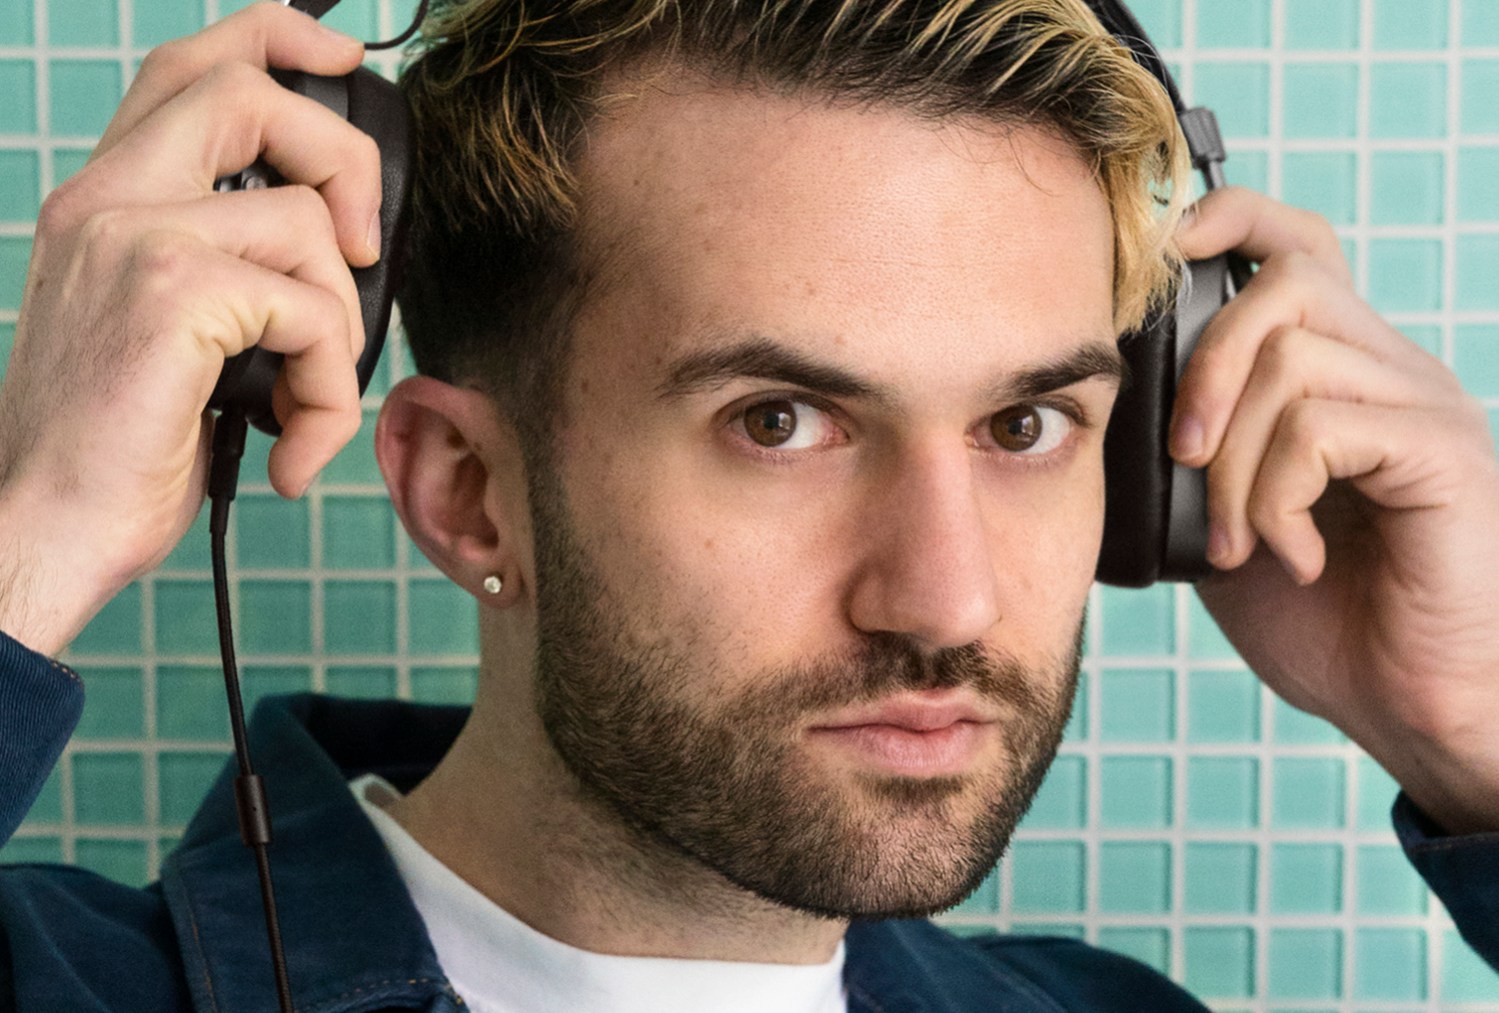 Lifestyle image of DJ A-Trak wearing Master and Dynamic headphones